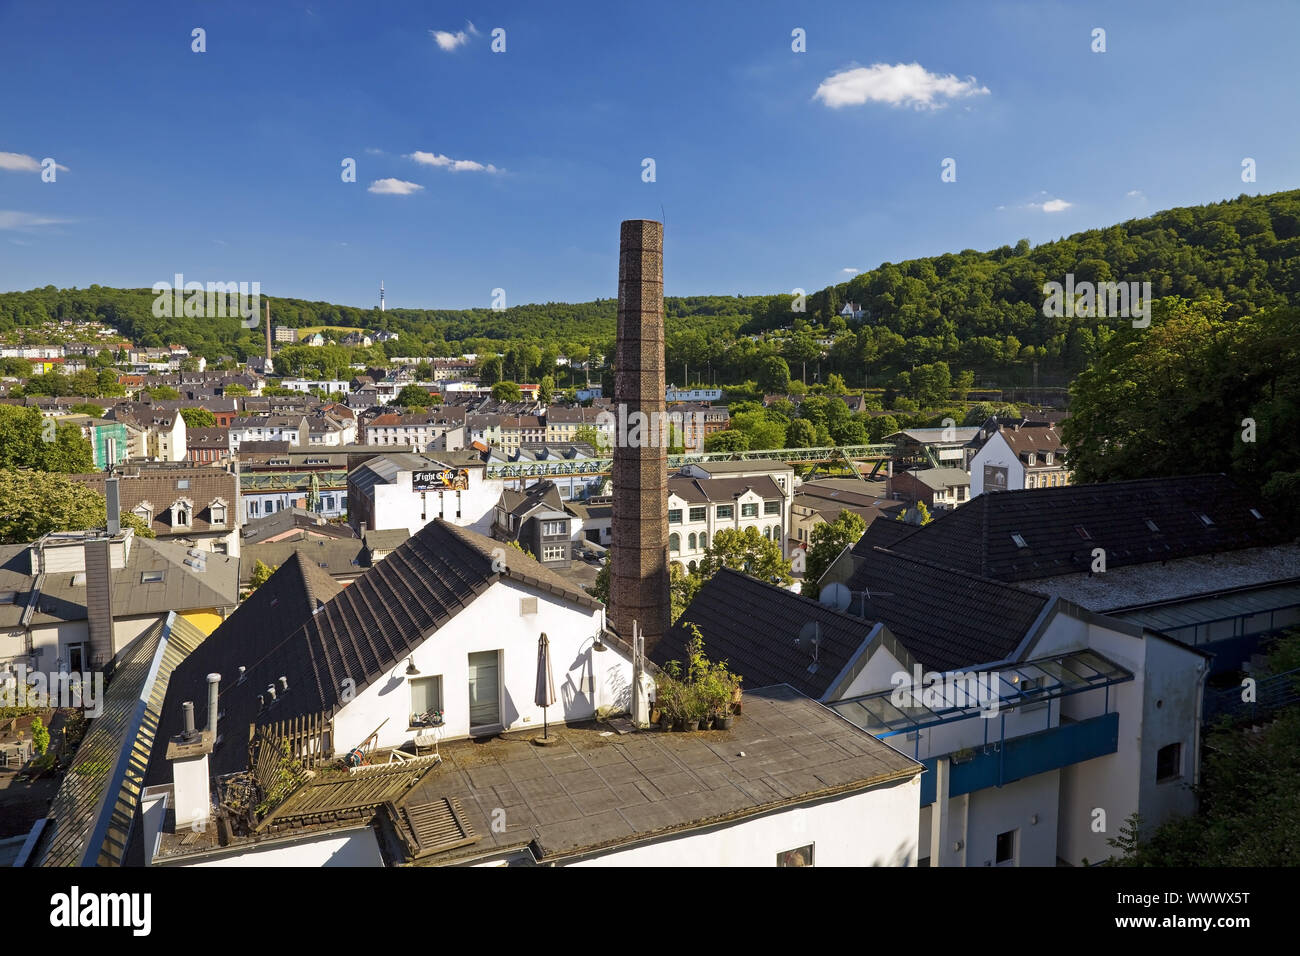 cityscape of district Elberfeld, Wuppertal, Bergisches Land, North Rhine-Westphalia, Germany, Europe Stock Photo